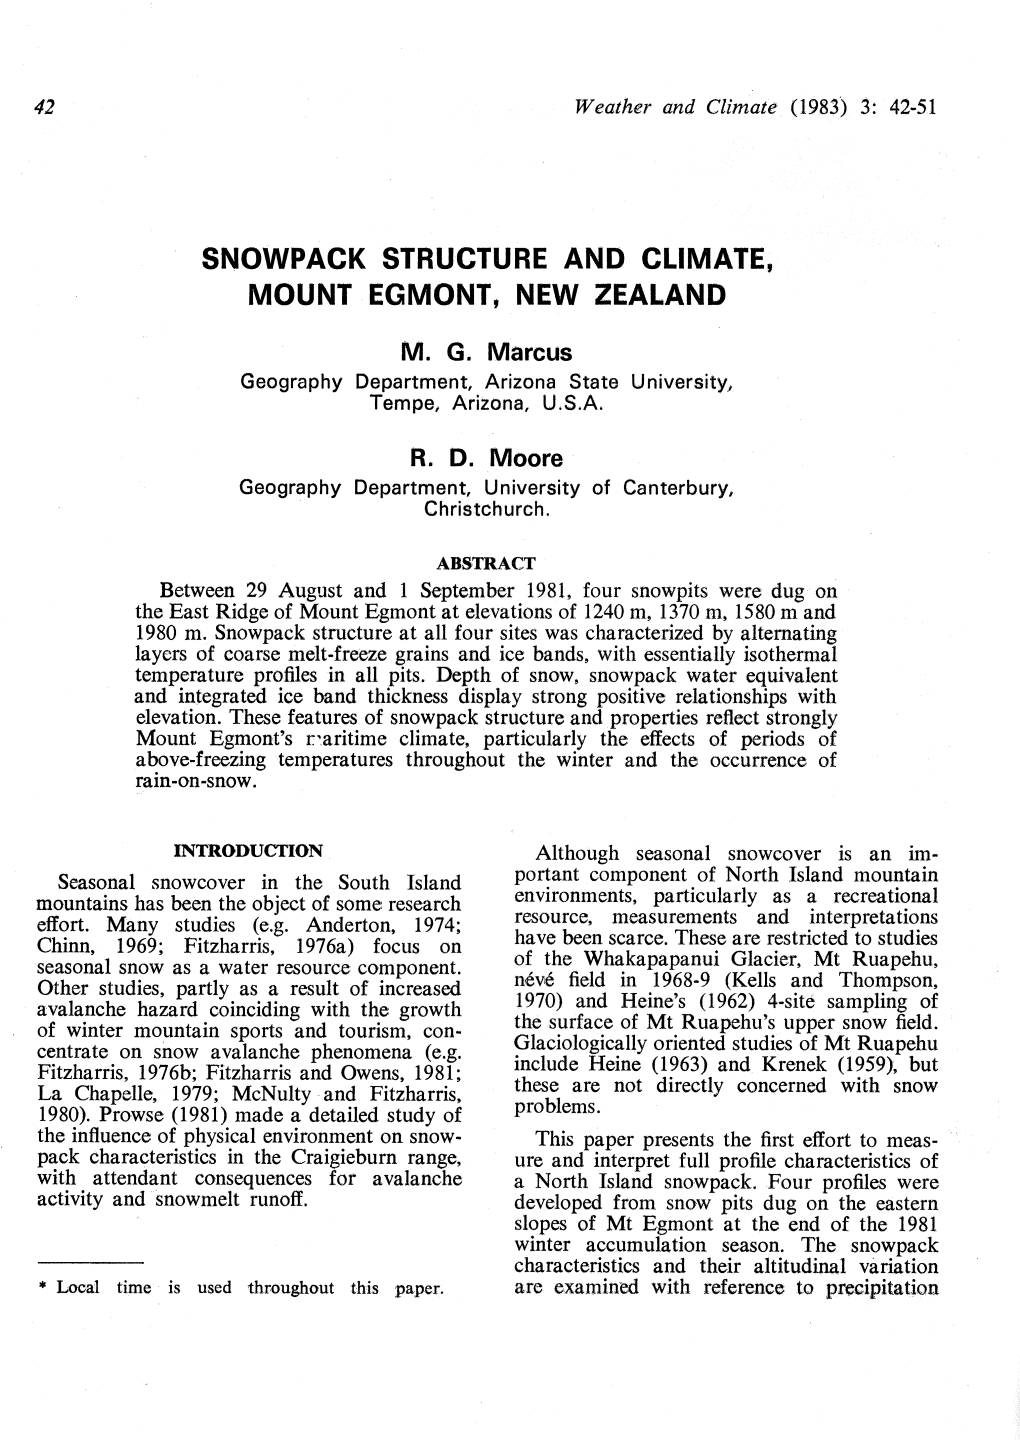 Snowpack Structure and Climate, Mount Egmont, New Zealand